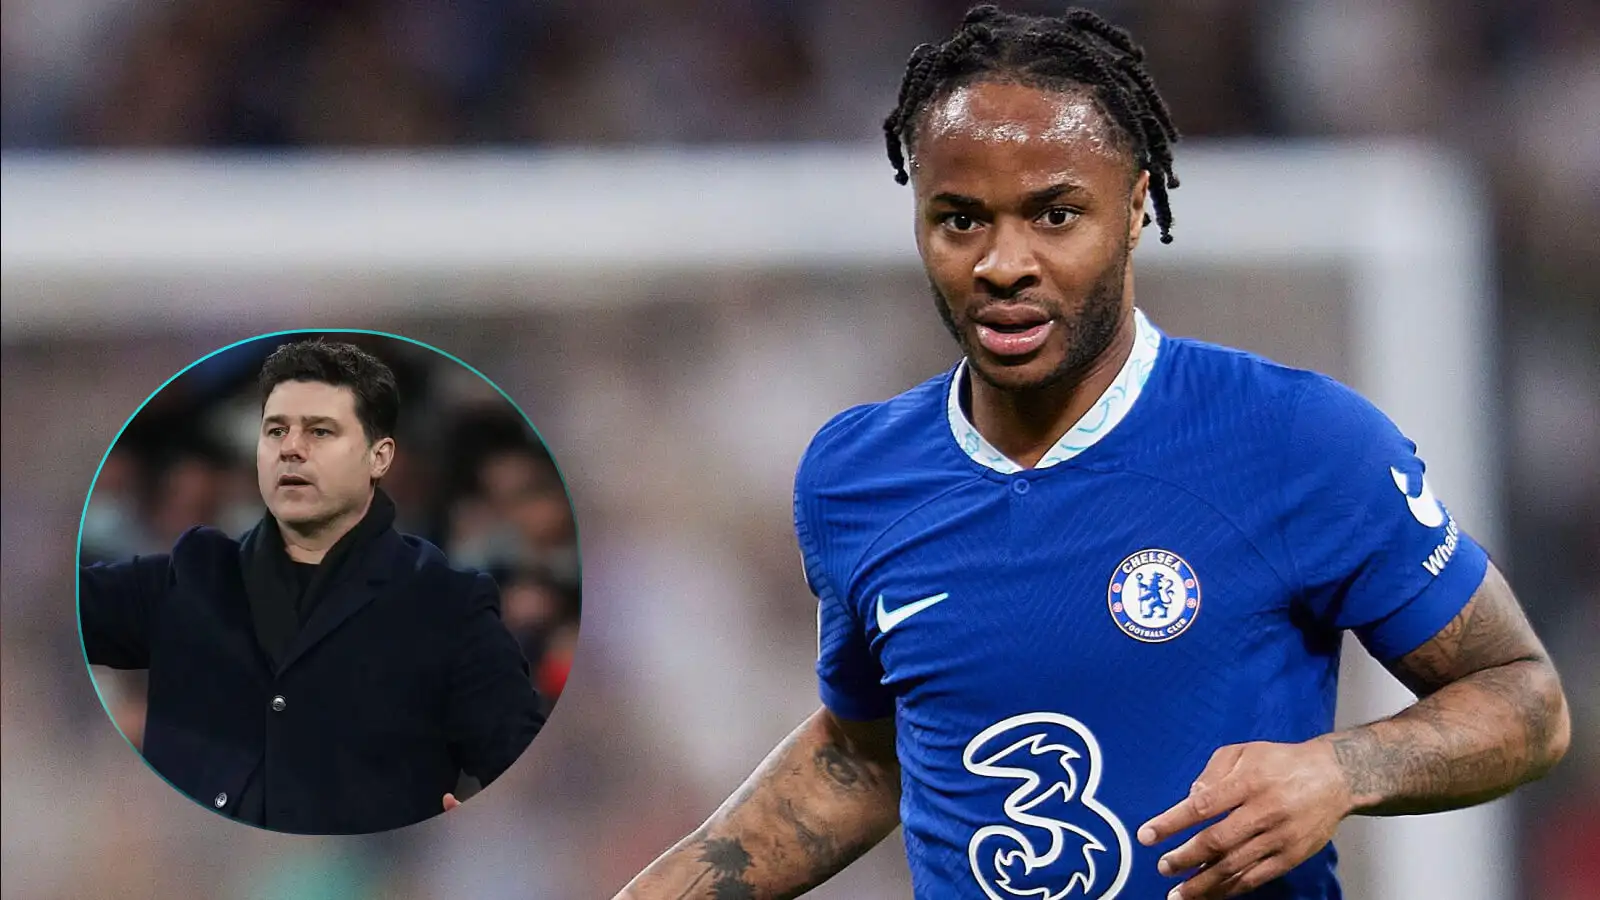 Raheem Sterling is among the candidates being considered by Mauricio Pochettino to be the new Chelsea captain.